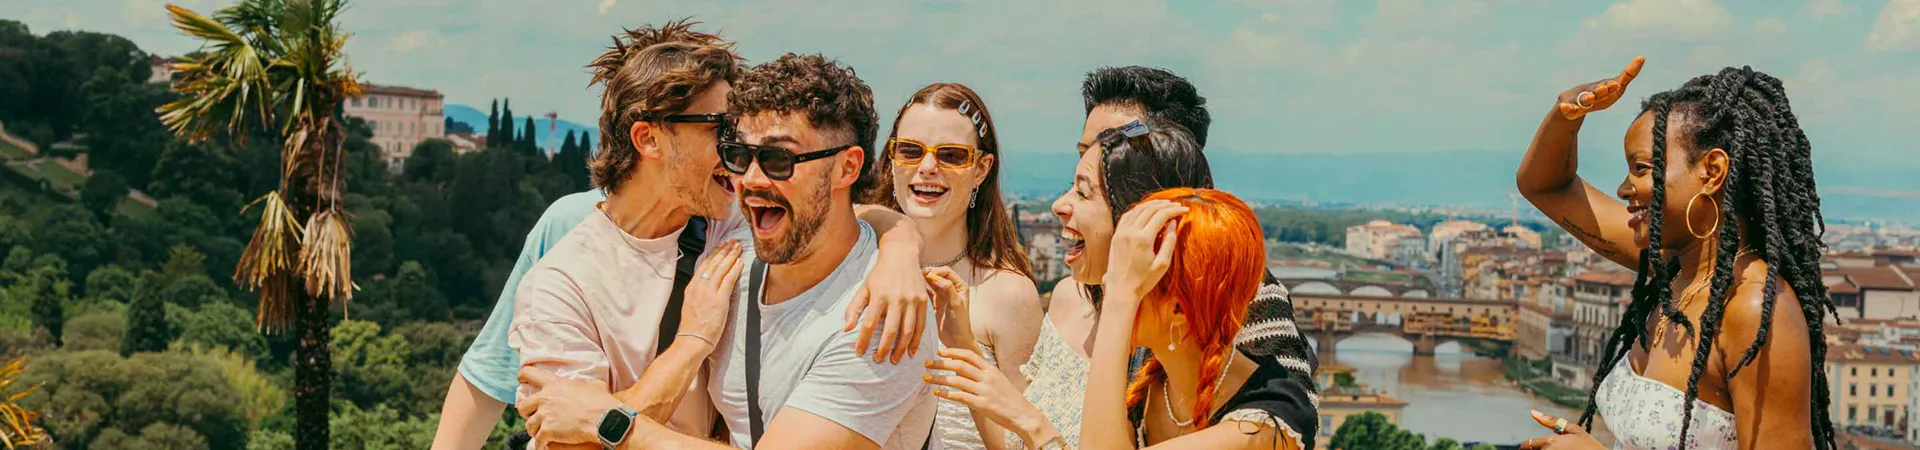 Group Of Young Travelers Having Fun In The Sun In Italy